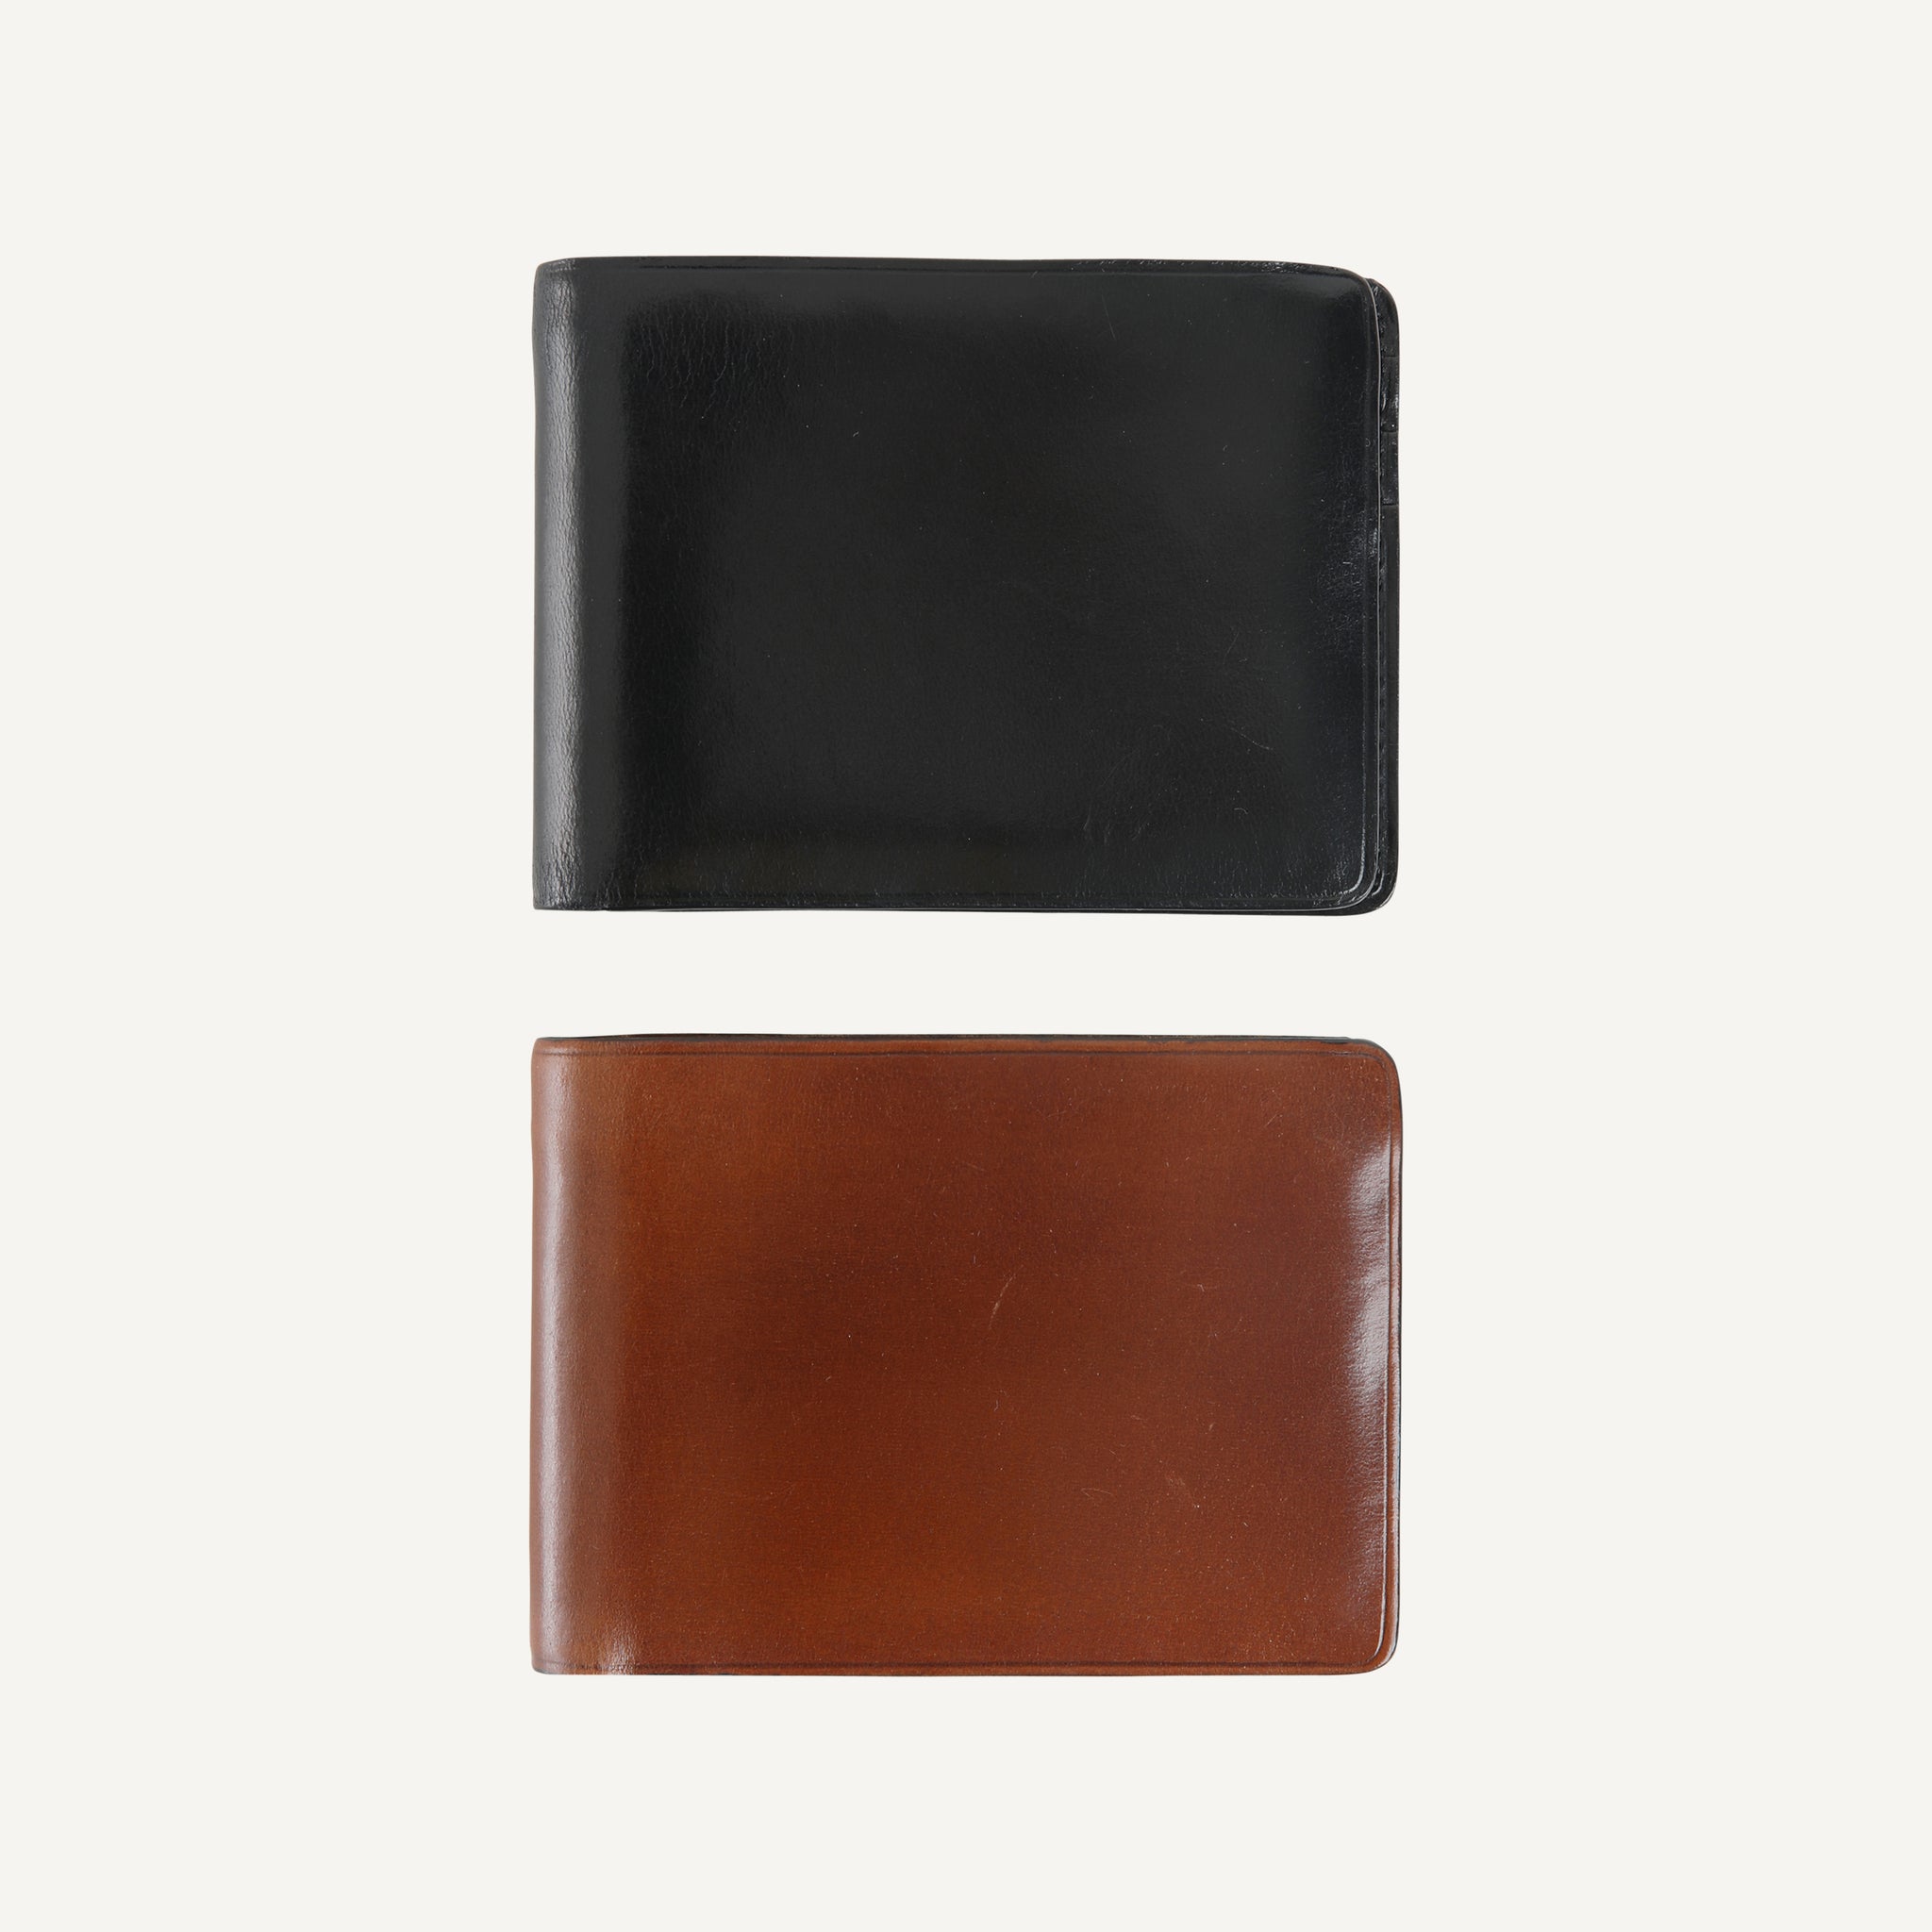 IL BUSSETTO LEATHER BILLFOLD